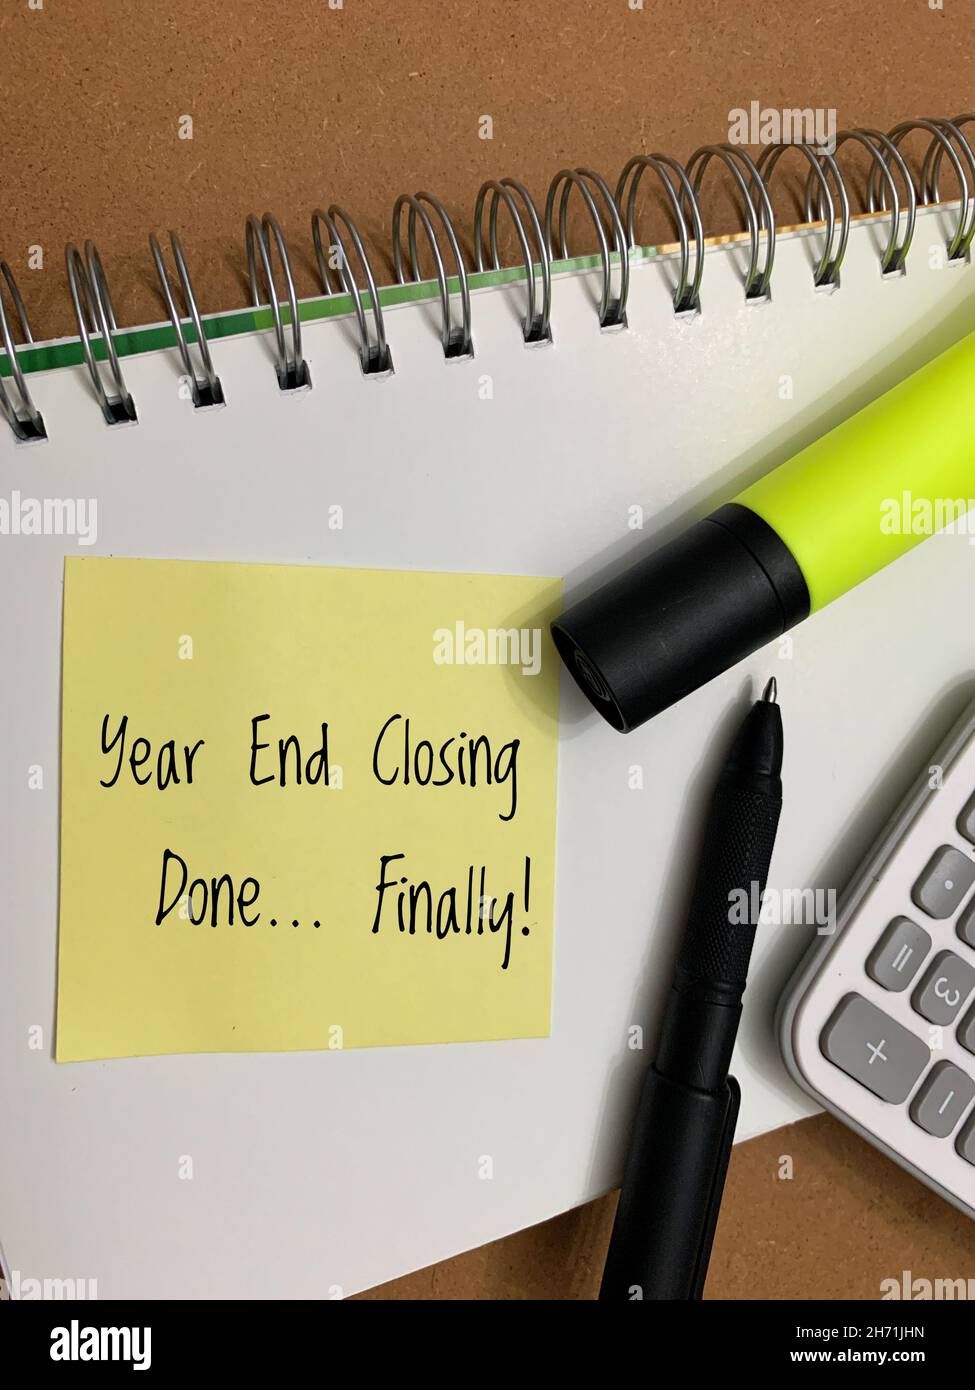 Completed year end closing text on sticky pad with calculator, highlighter and pen background Stock Photo